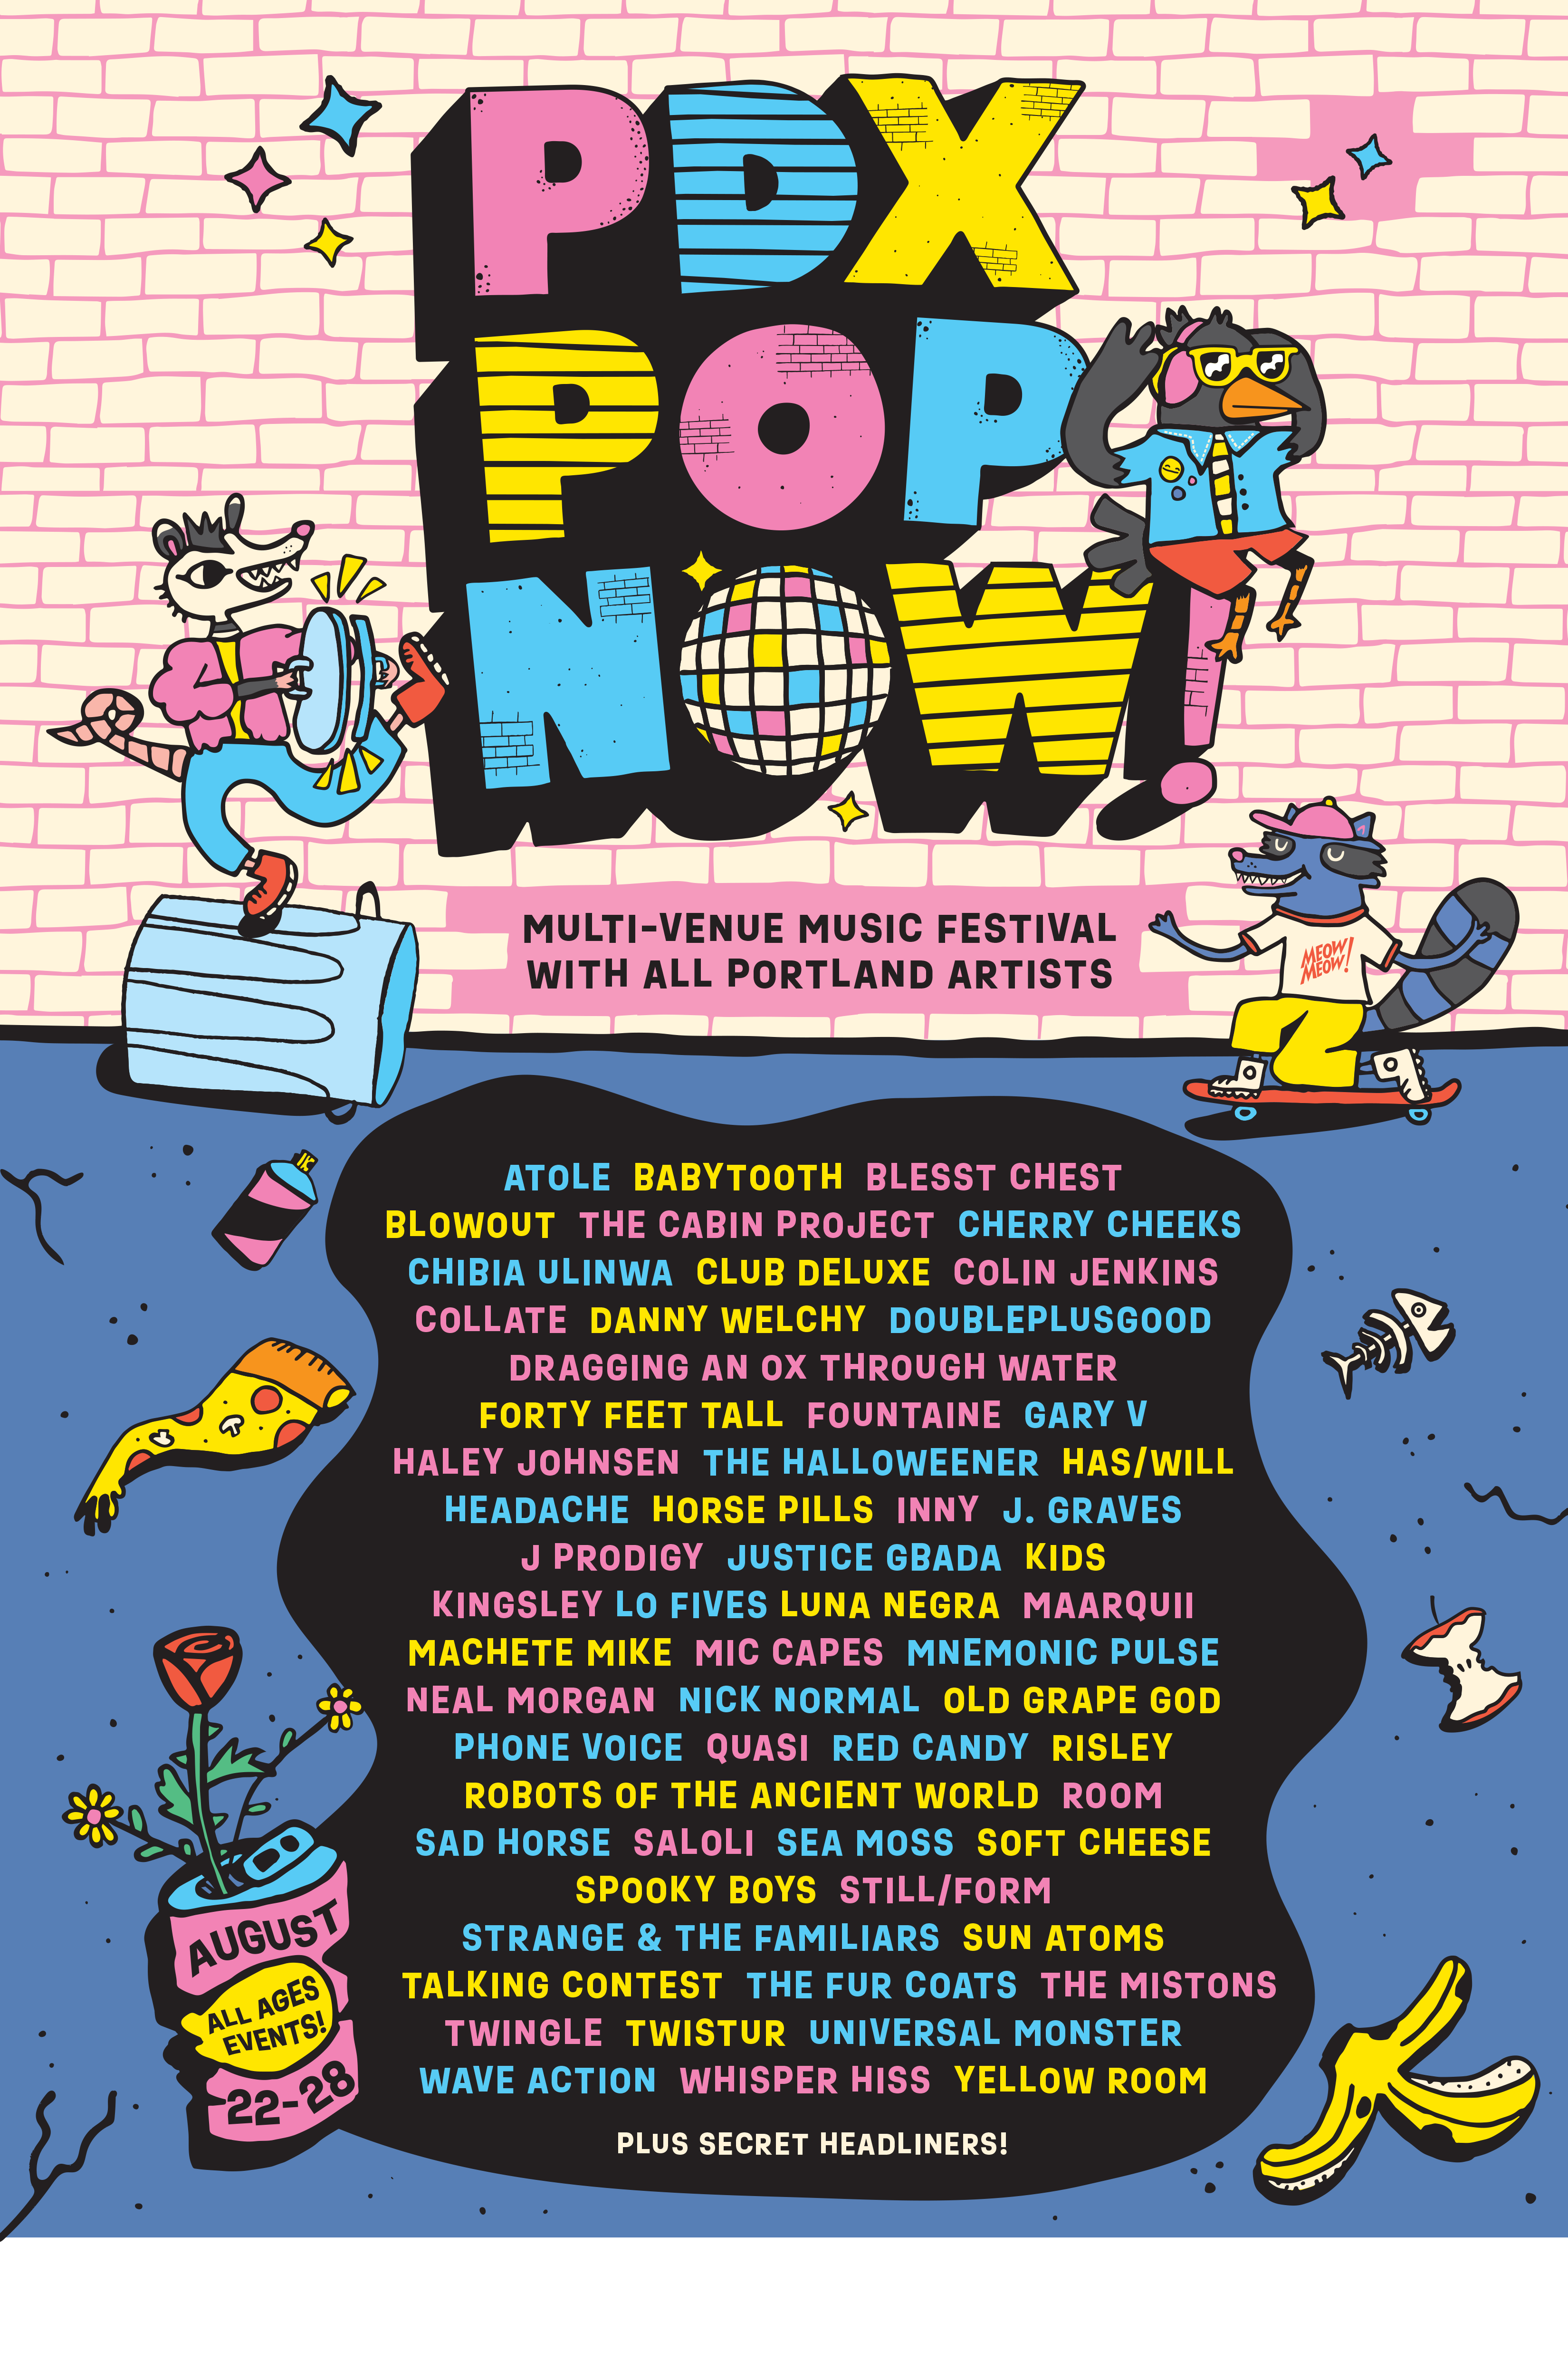 PDX Pop Now Festival Lineup featuring: Cherry Cheeks, Club Deluxe, Collate, Gary V, Halloweener, Has/Will, Headache, Horse Pills, Inny, J. Graves, Kingsley, Maarquii, Mic Capes, Mnemonic Pulse, Neal Morgan, Nick Normal, Phame, Phone Voice, Quasi, Red Candy, Room, Saloli, Sea Moss, Soft Cheese, Still/Form, Talking Contest, The Mistons, Twistur, Whisper Hiss, & more